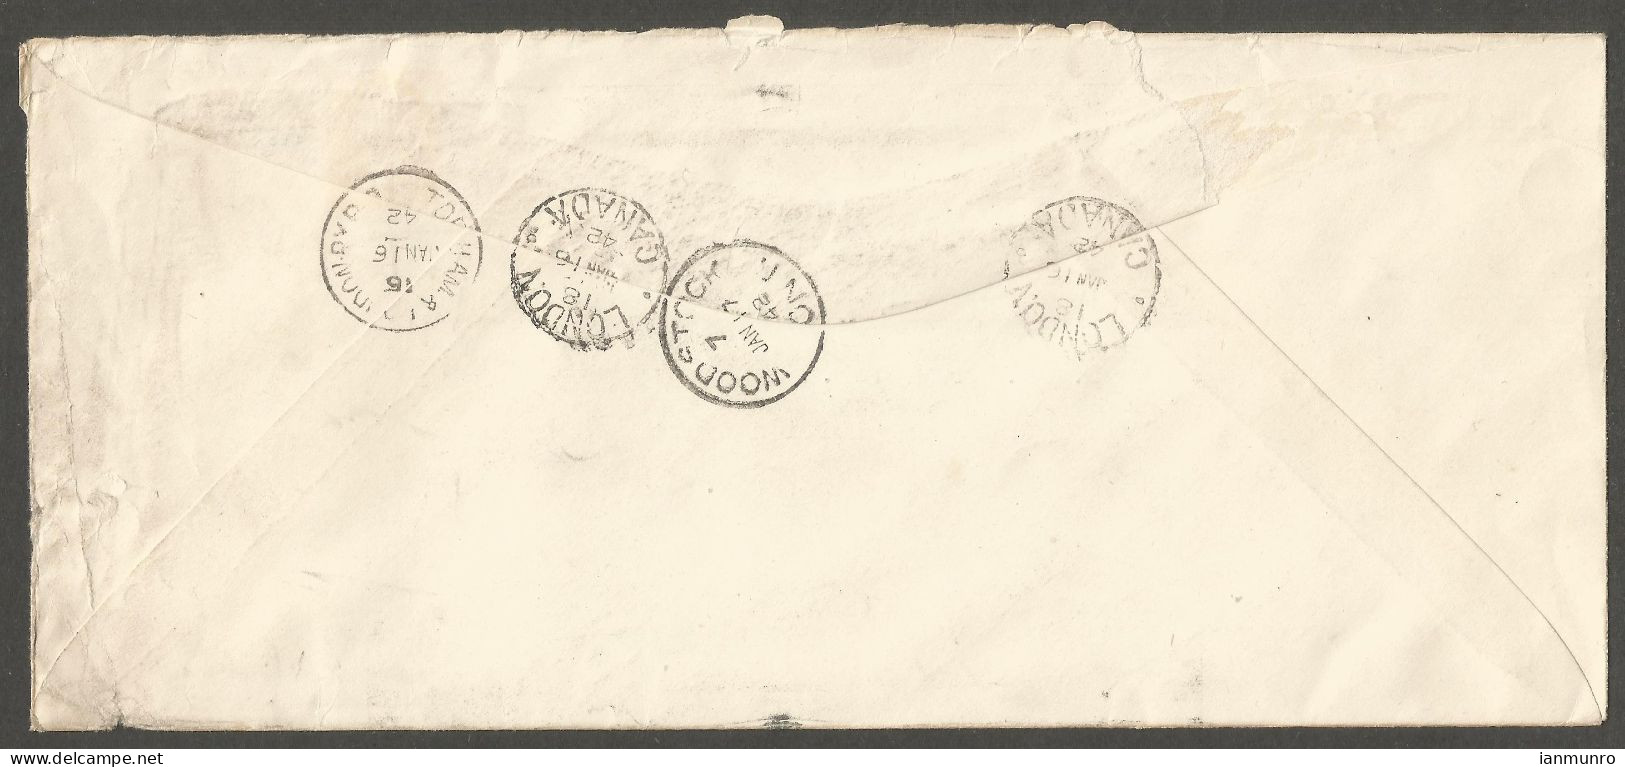 1942 Registered Cover 13c Mufti RPO CDS London To Woodstock Ontario - Postal History